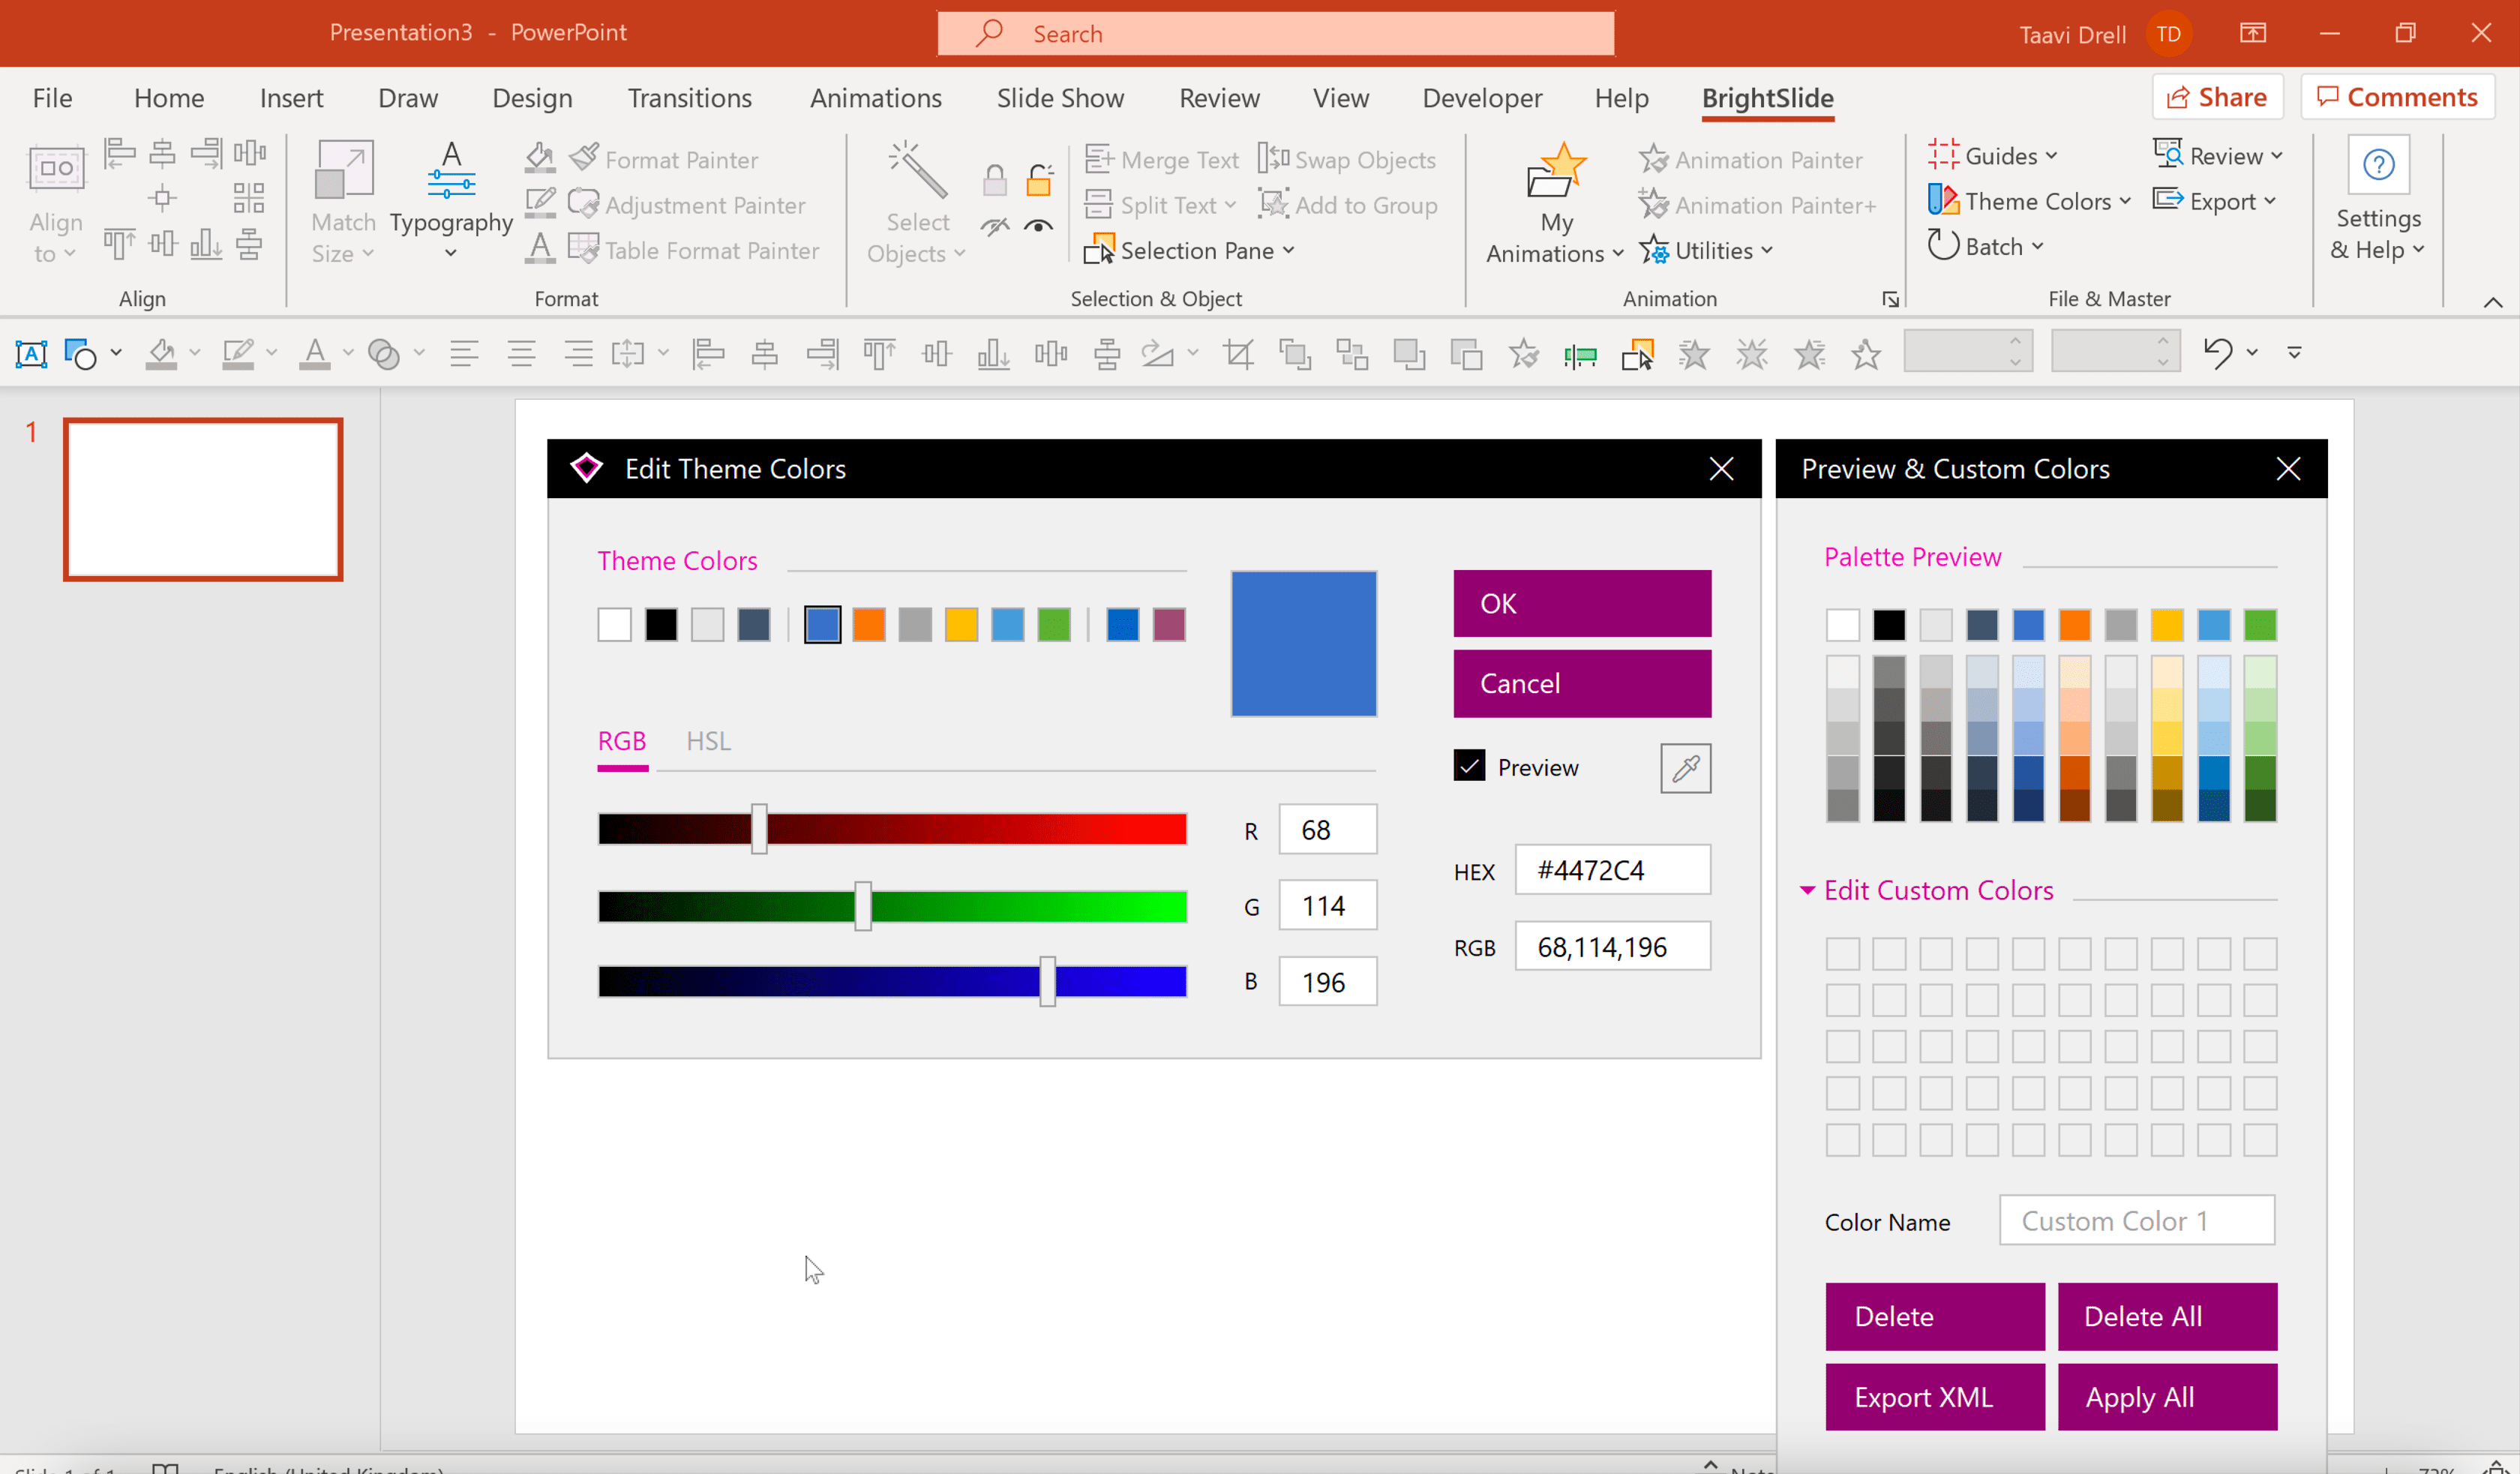 powerpoint for mac open color palette the .thmx file is greyed out